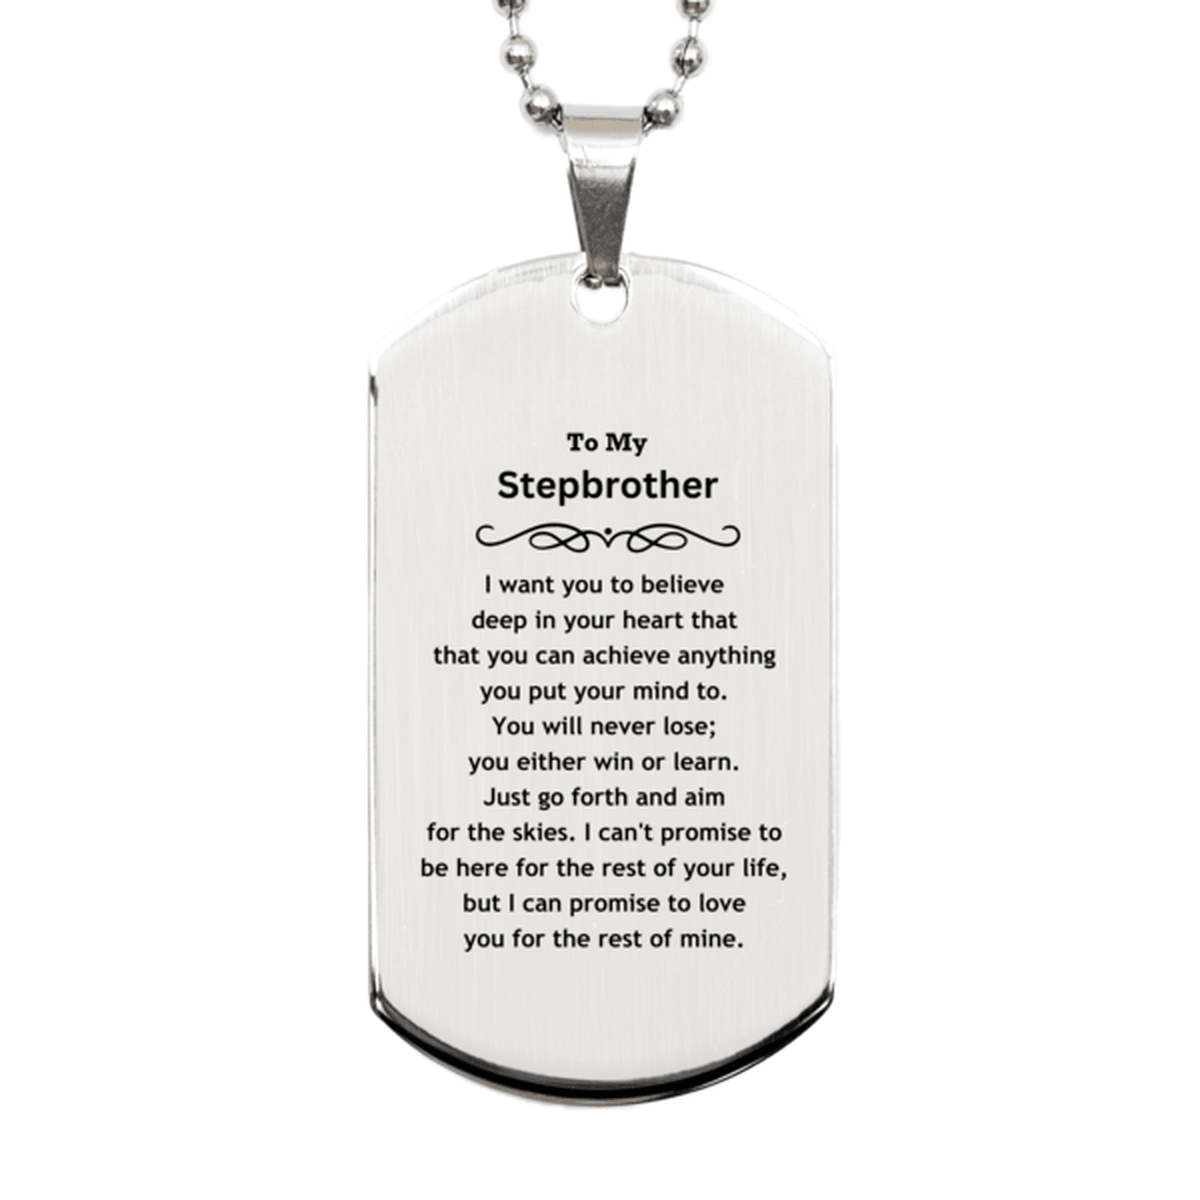 Motivational Stepbrother Silver Dog Tag Engraved Necklace, I can promise to love you for the rest of my life, Birthday Christmas Jewelry Gift - Mallard Moon Gift Shop